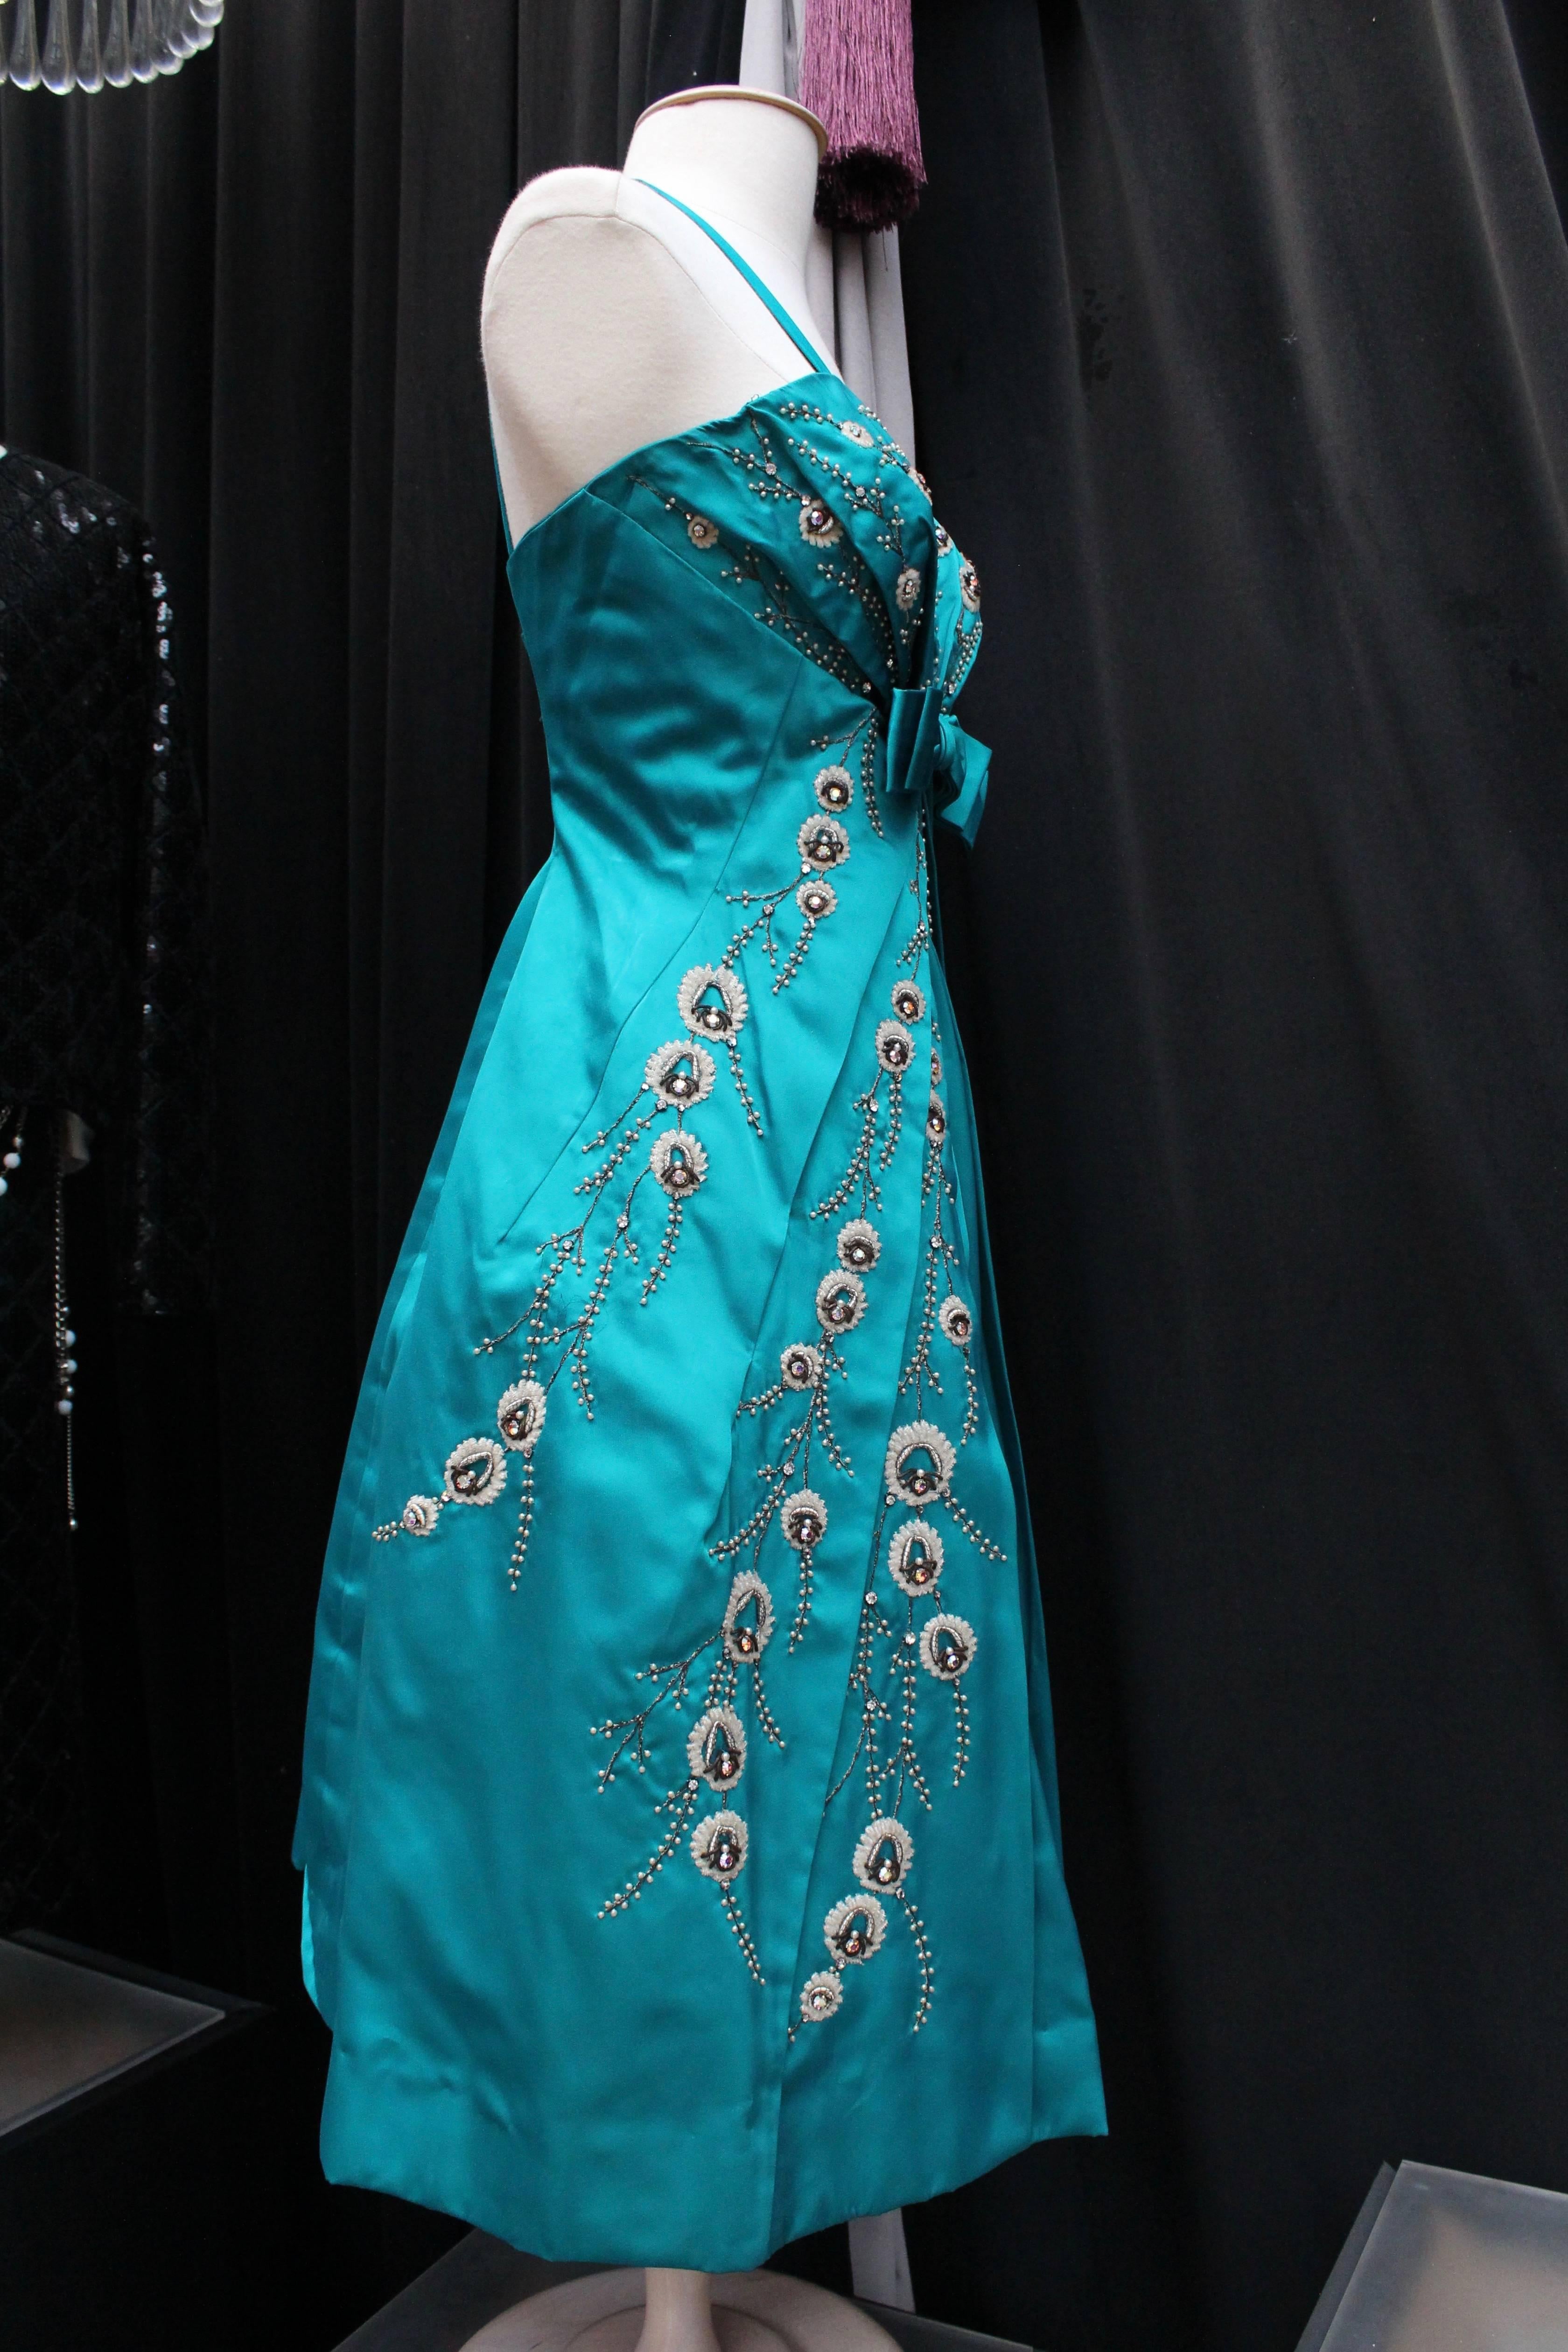 MODISSA – Lovely turquoise satin puffball shaped cocktail dress. It is embellished with a wide bow at bust and pearly beads and rhinestones embroideries representing branches. The delicate pleat work runs upwards from the bow towards the shoulders,